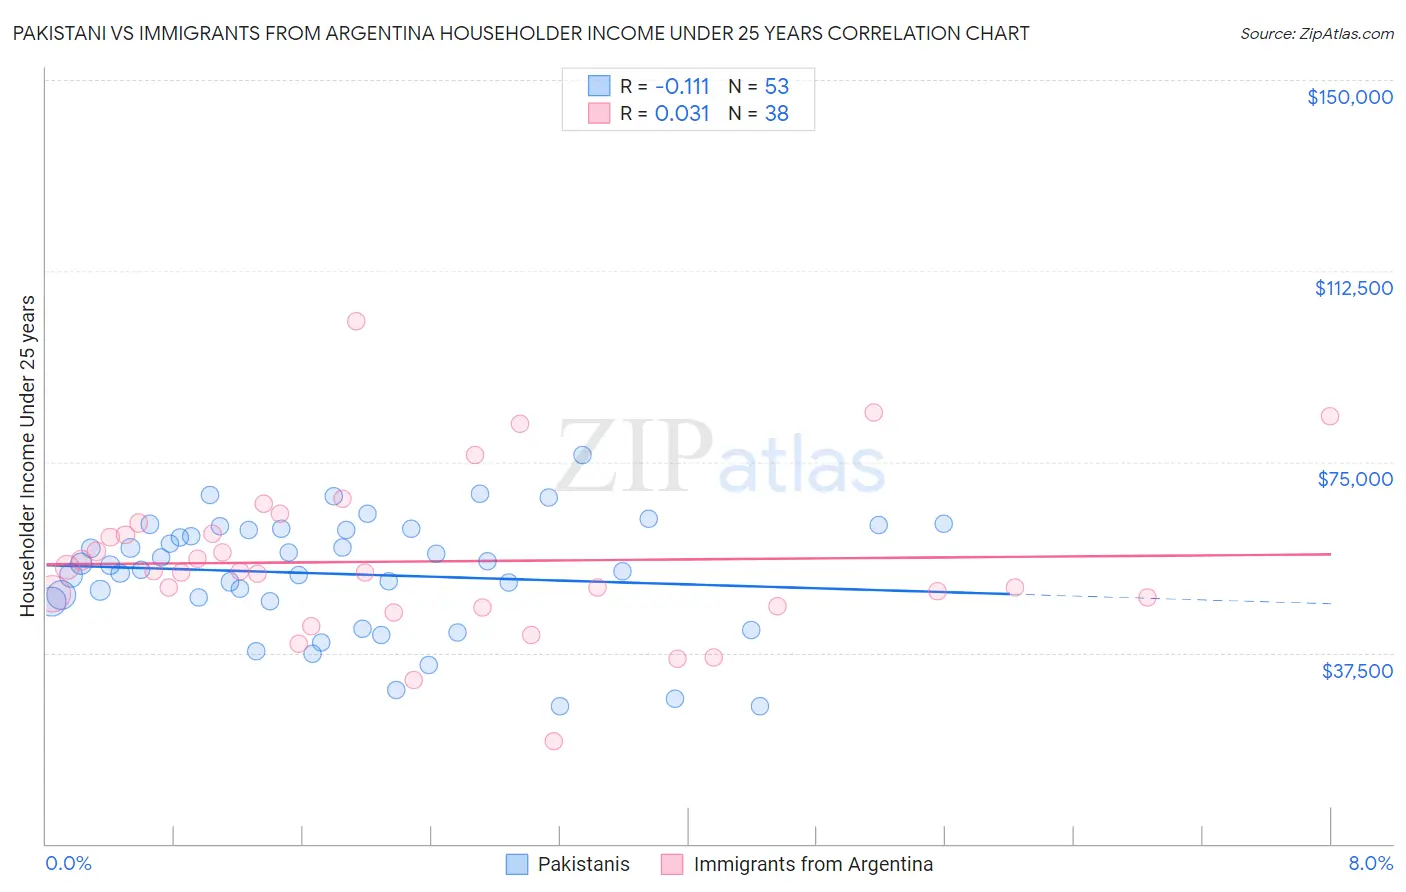 Pakistani vs Immigrants from Argentina Householder Income Under 25 years